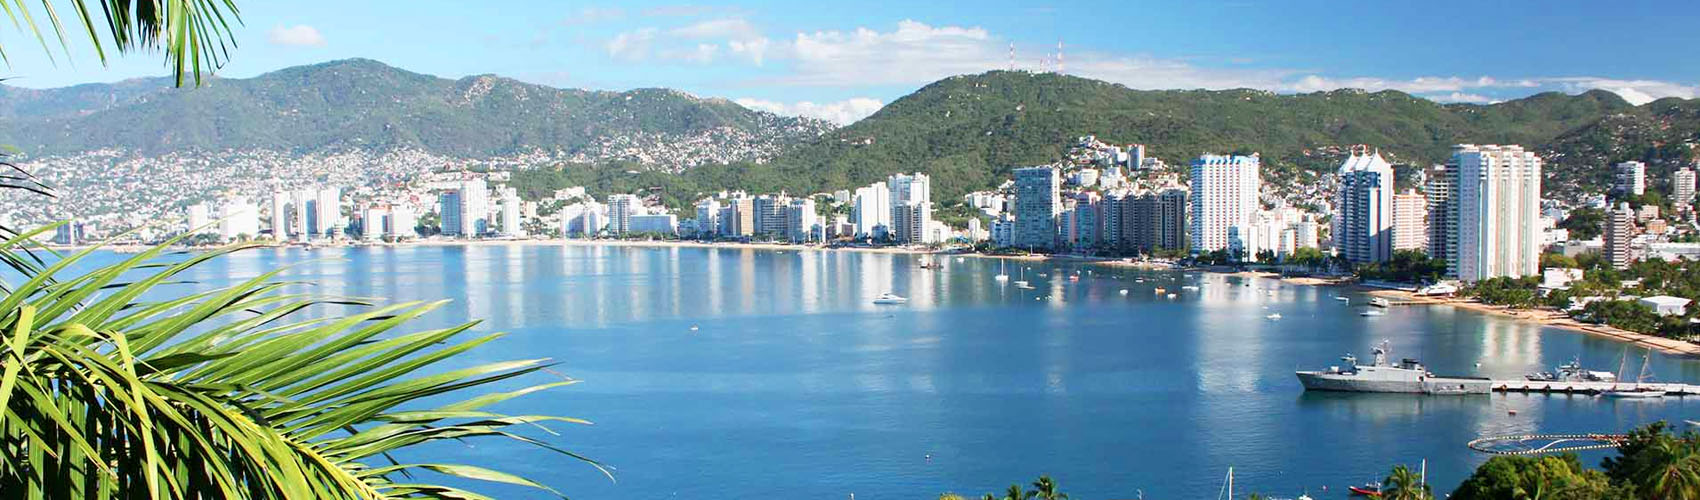 Acapulco real estate for sale, homes, beachfront condos, investments